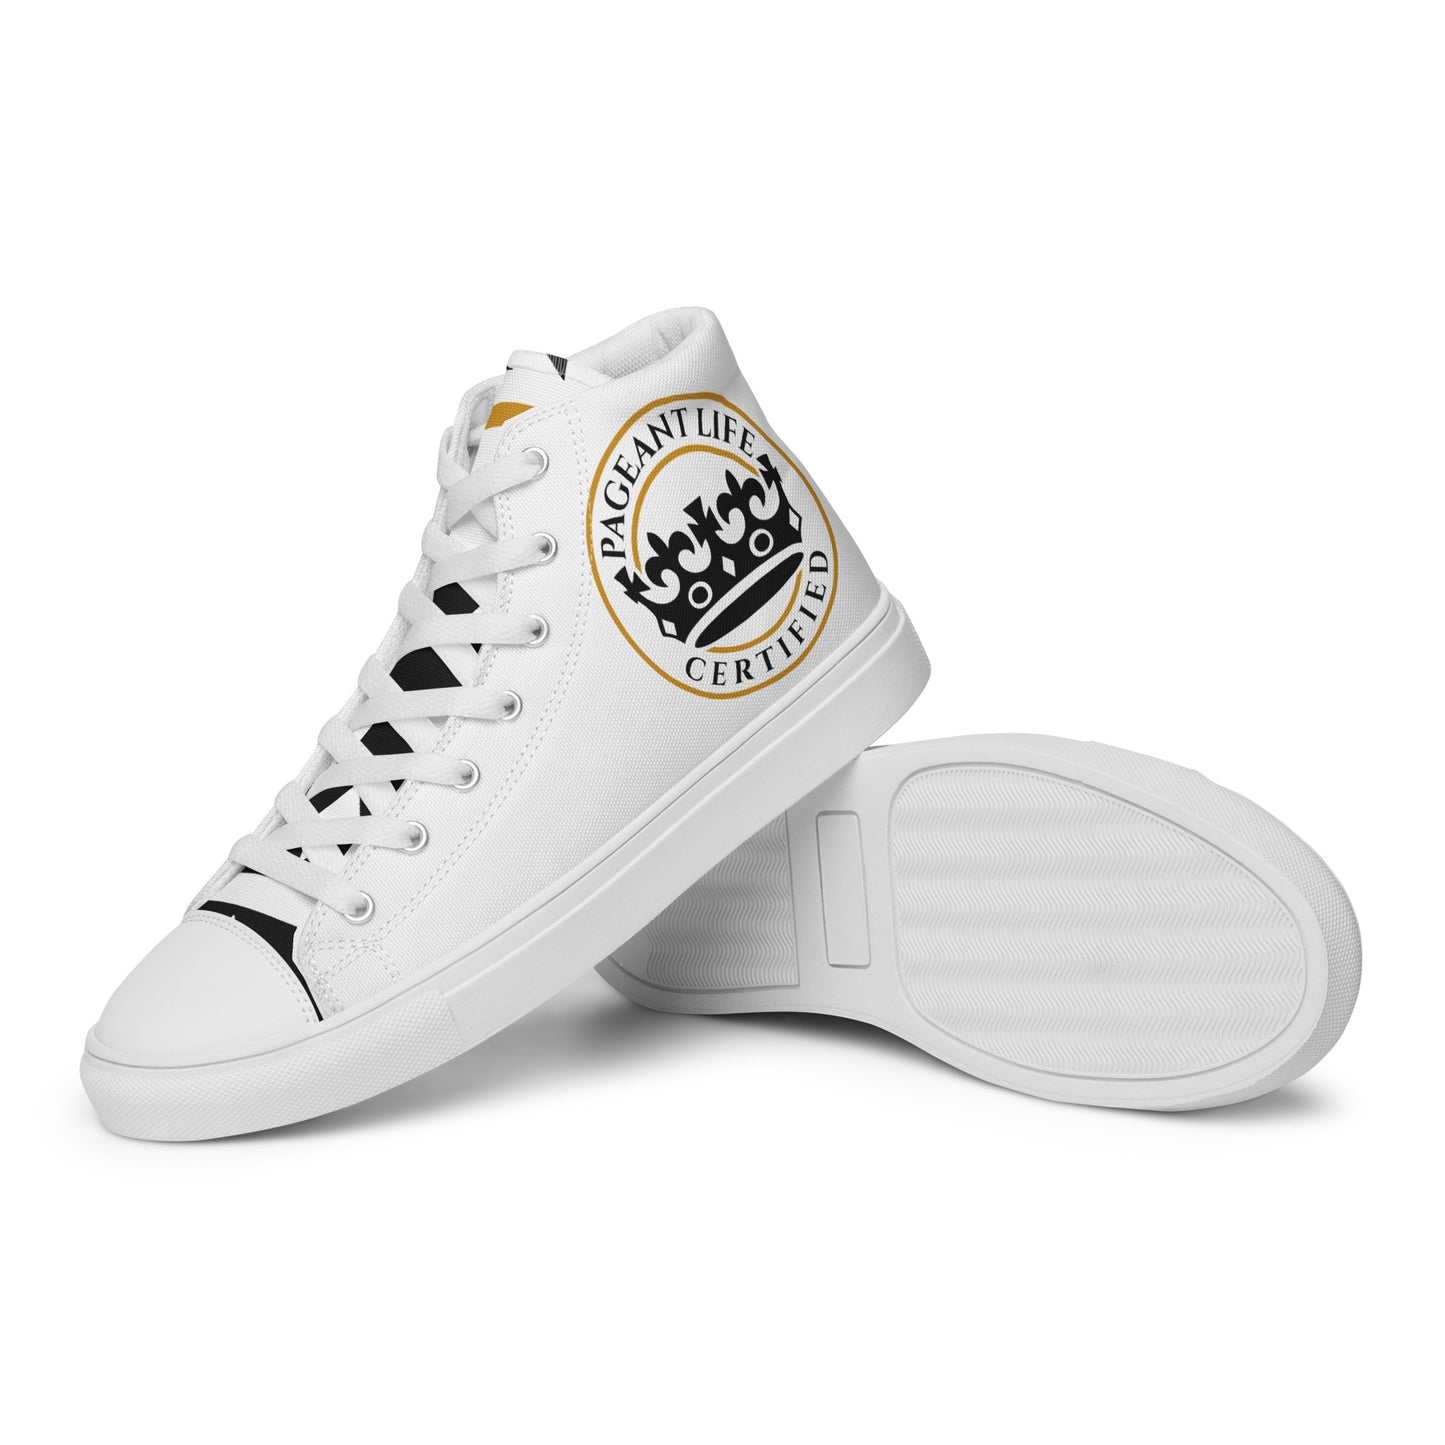 Black and Gold/ White Pageant Life Certified Women’s high top canvas shoes